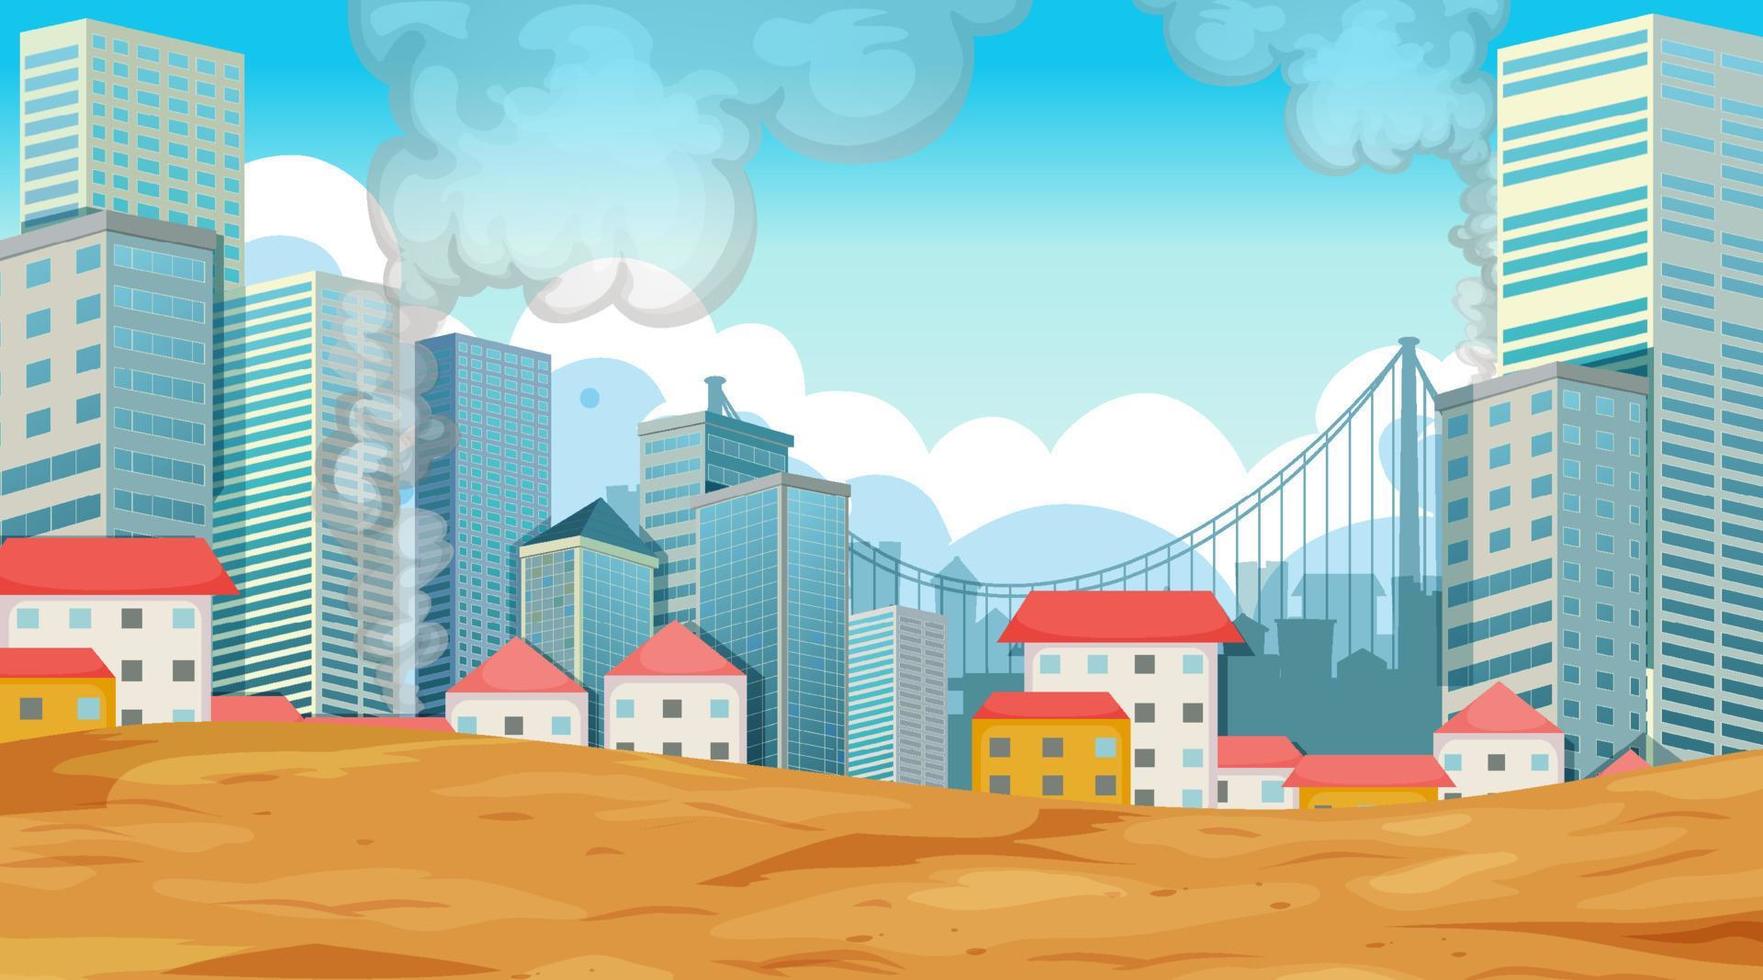 A  scene landscape with building vector